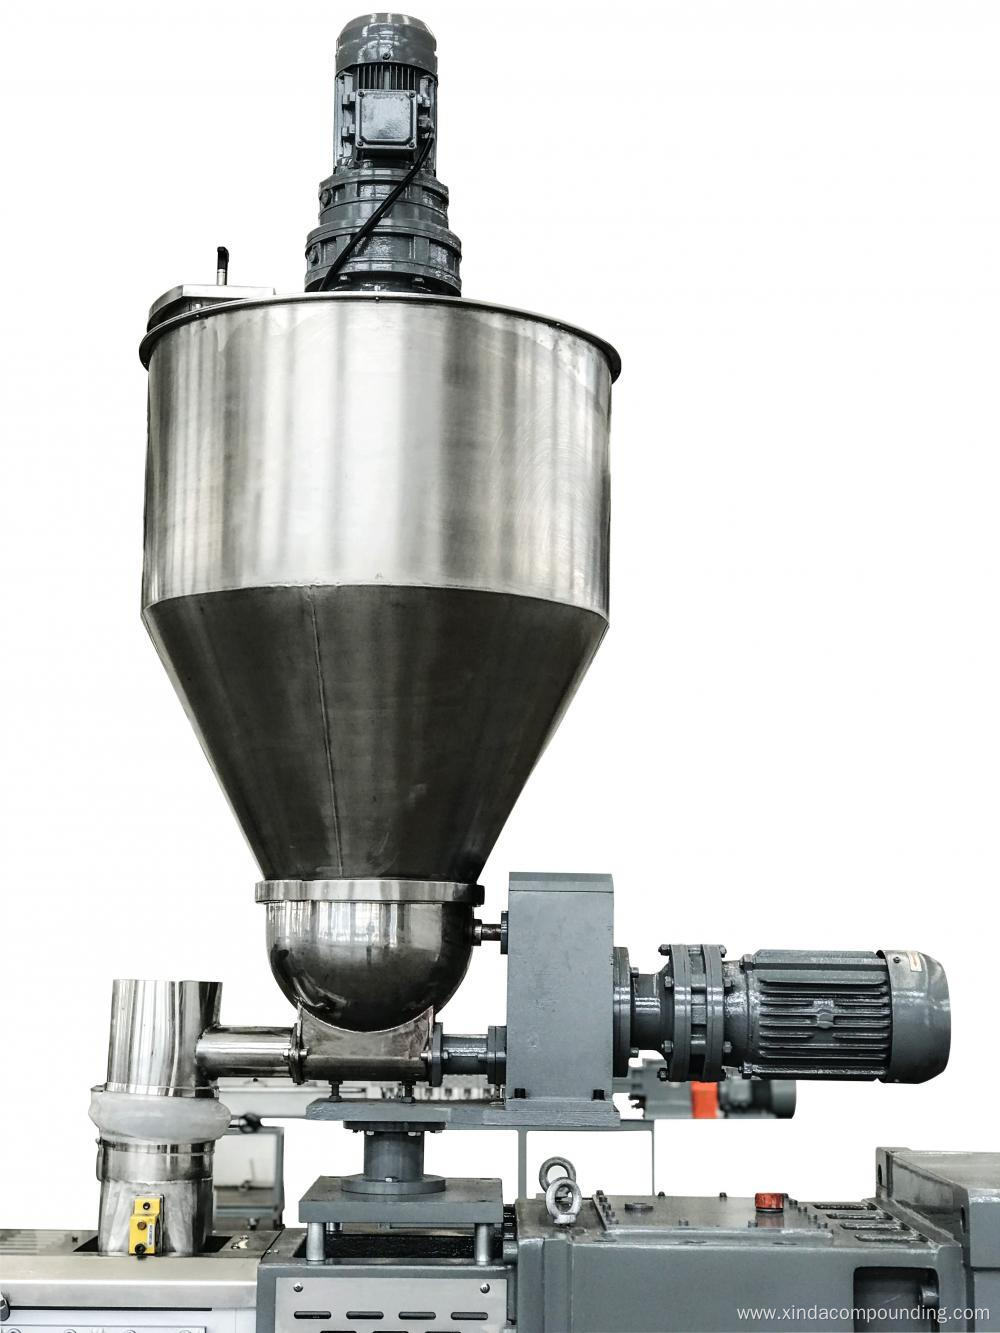 Clamshell Barrel Co-roating Twin Screw Extruder